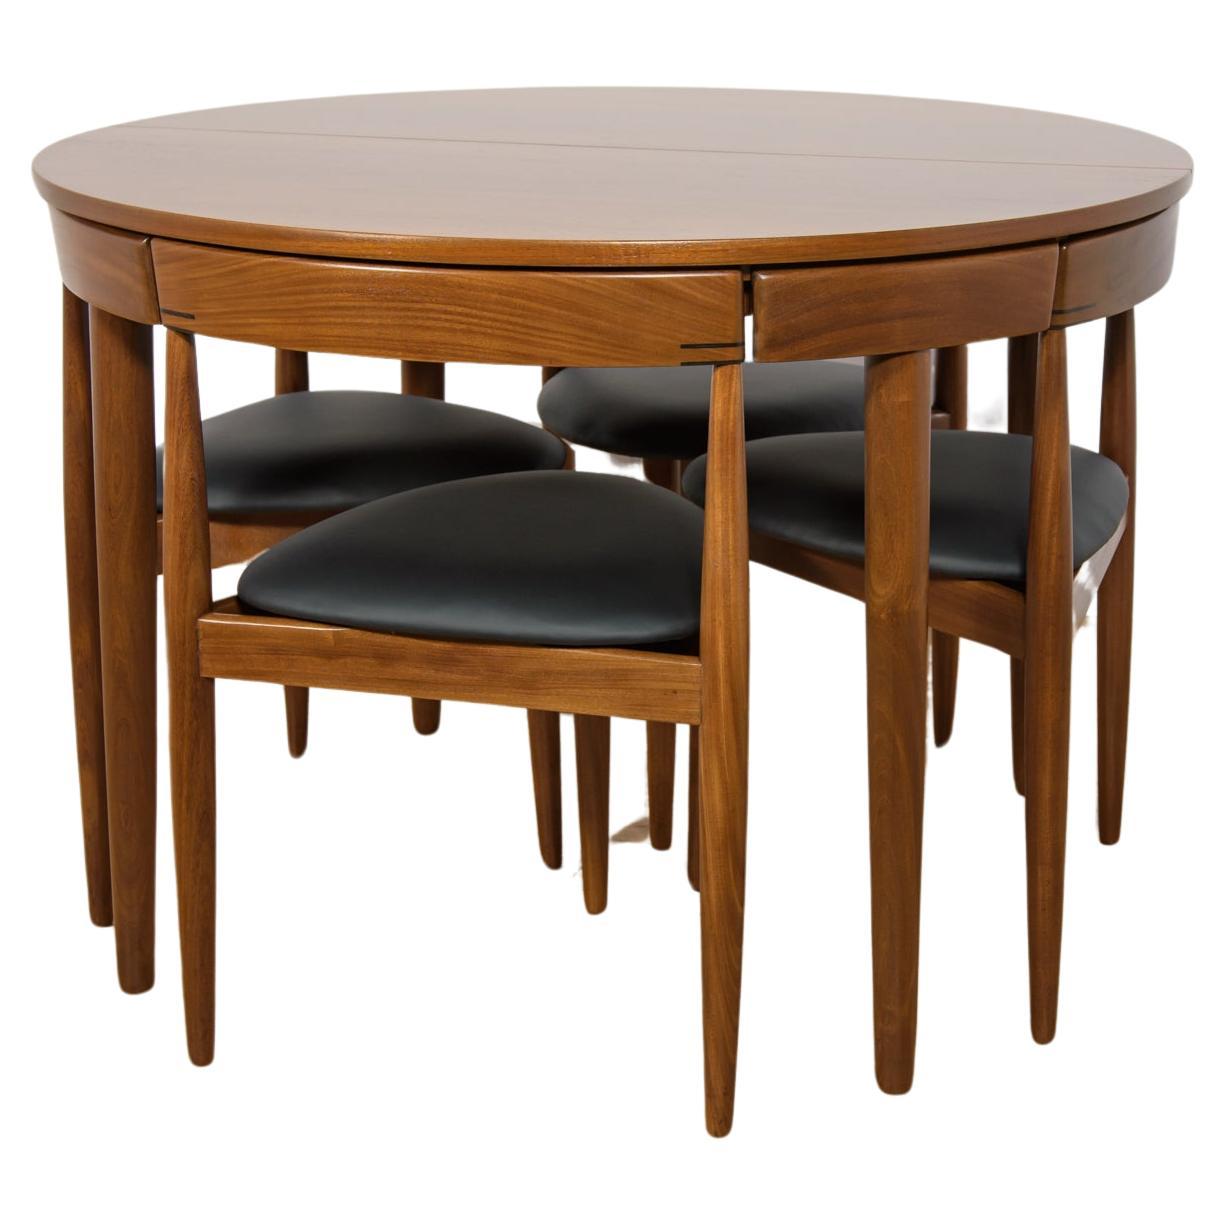  Mid-Century Teak Dining Table and Chairs Set by Hans Olsen for Frem Røjle.